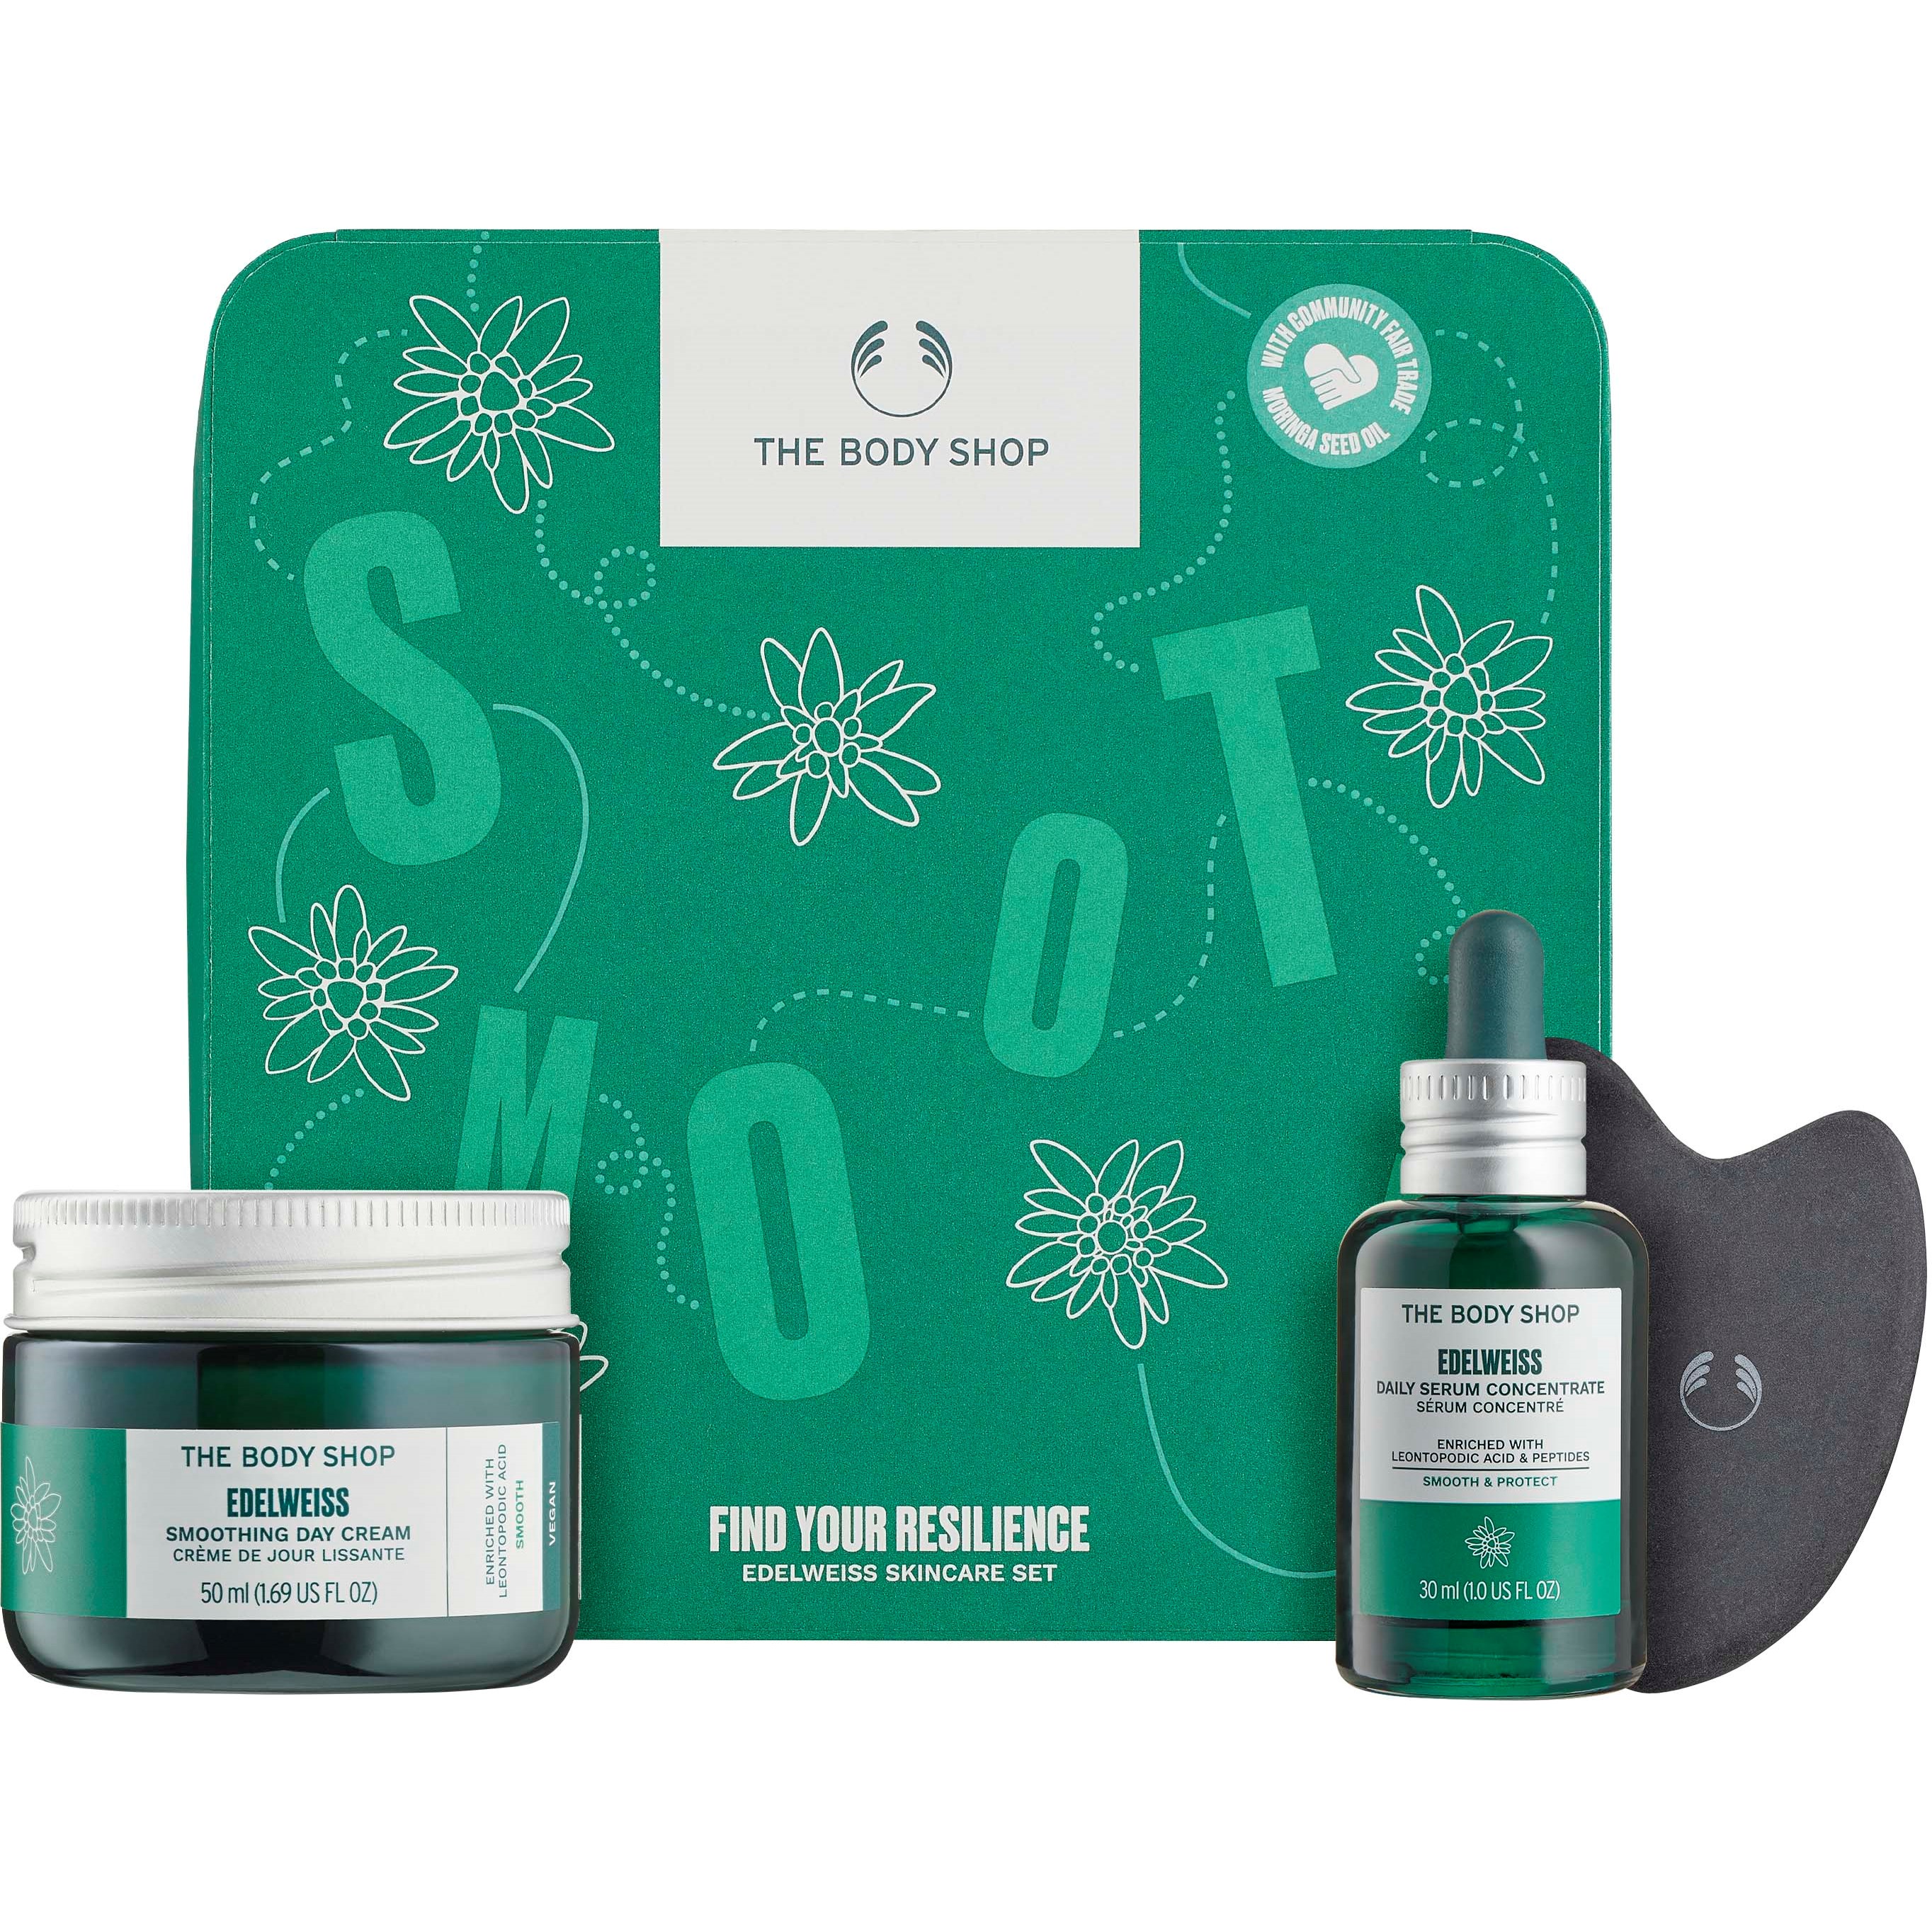 Läs mer om The Body Shop Edelweiss Find Your Resilience Edelweiss Skincare Gift